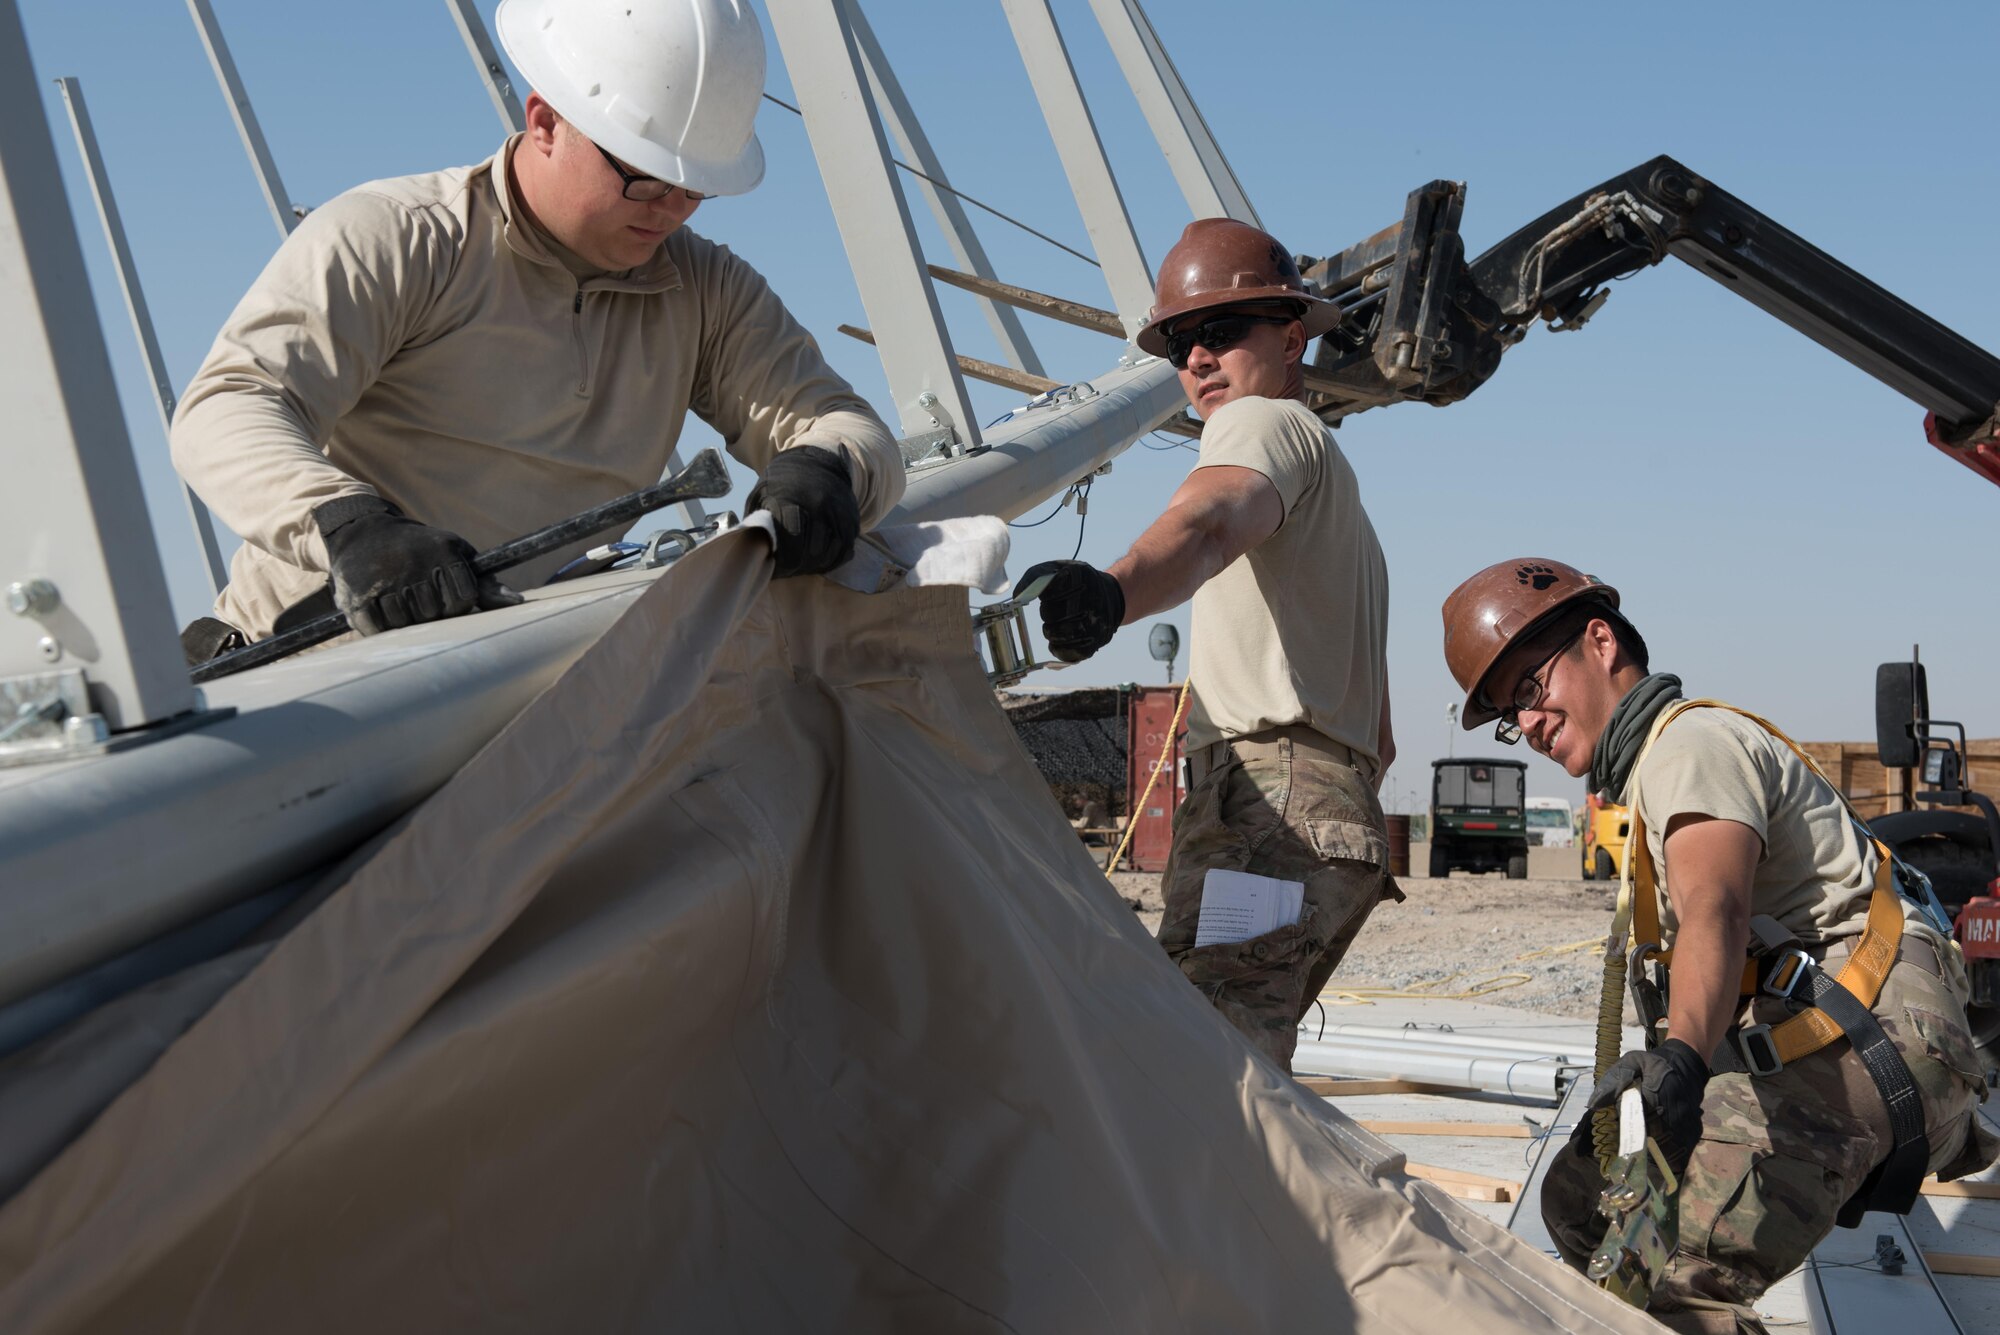 Airmen assigned to the 407th Expeditionary Civil Engineer Squadron and 577th Expeditionary Prime Beef Squadron install canvas on a new 4k dome at the 407th Air Expeditionary Group, March 21, 2017. The new structure will provide 4,000 square feet of covered area to maintain vehicles operating in support of Operation Inherent Resolve. (U.S. Air Force photo/Master Sgt. Benjamin Wilson)(Released)